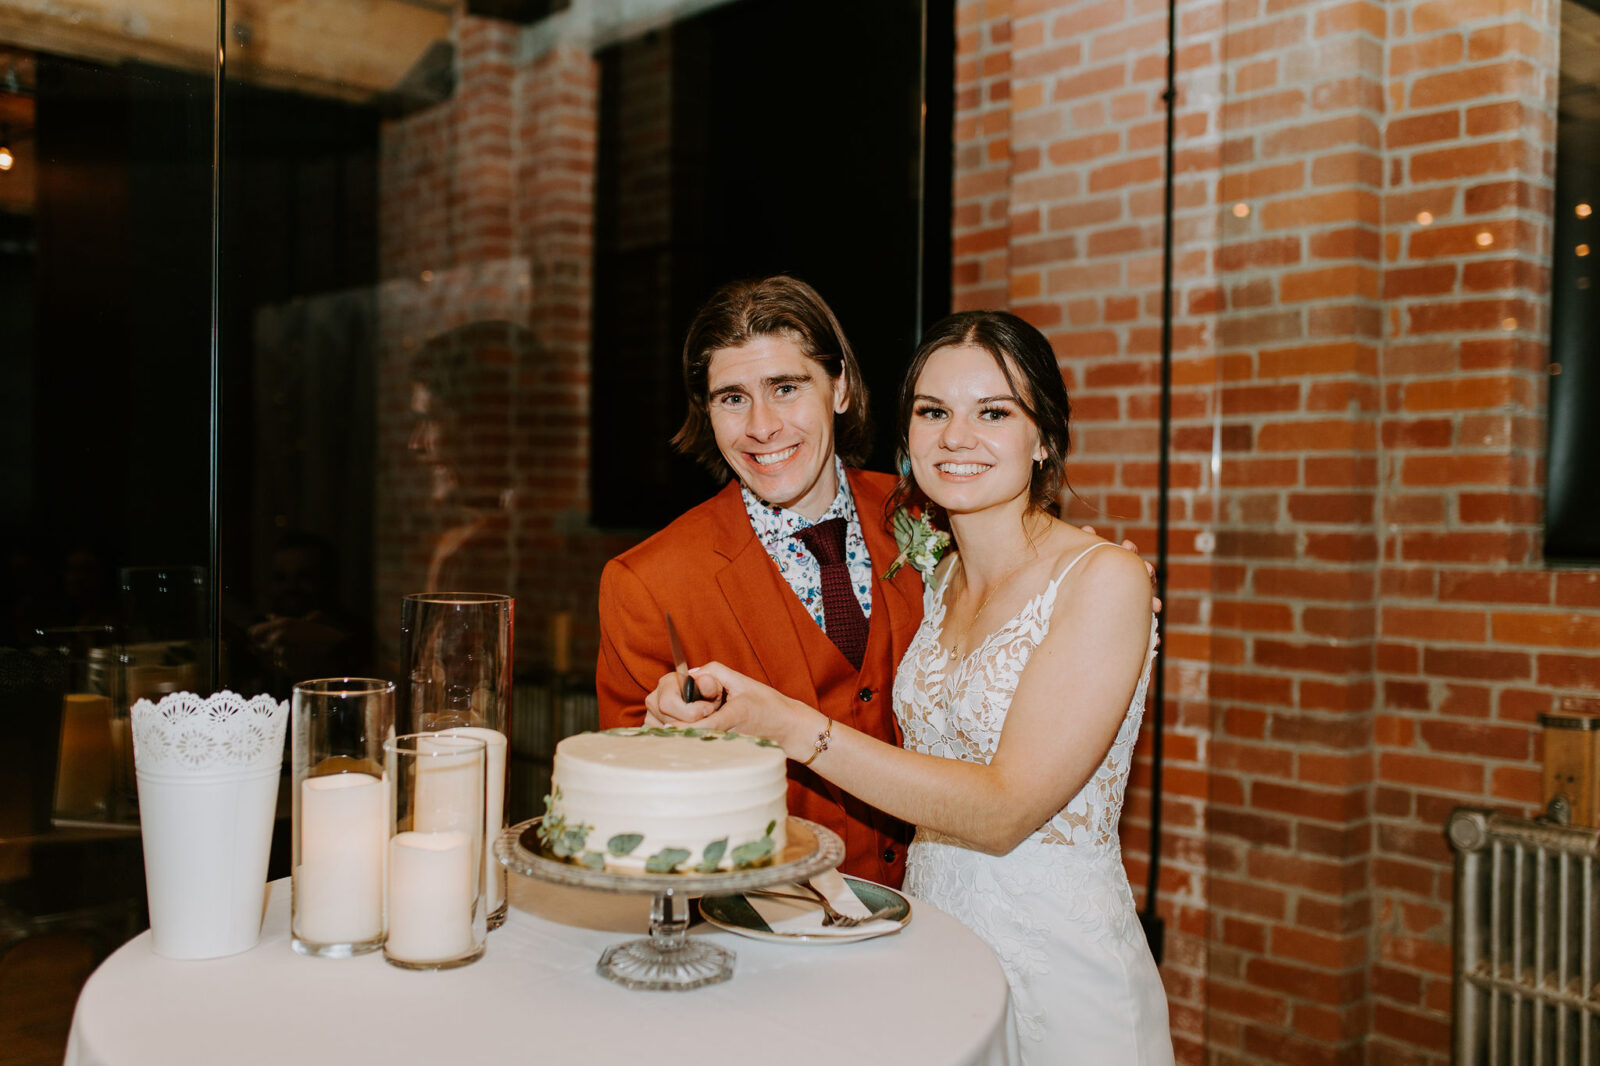 cake cutting, one-tier wedding cake with greenery; intimate and sentimental fall wedding reception at Char Bar restaurant in Calgary